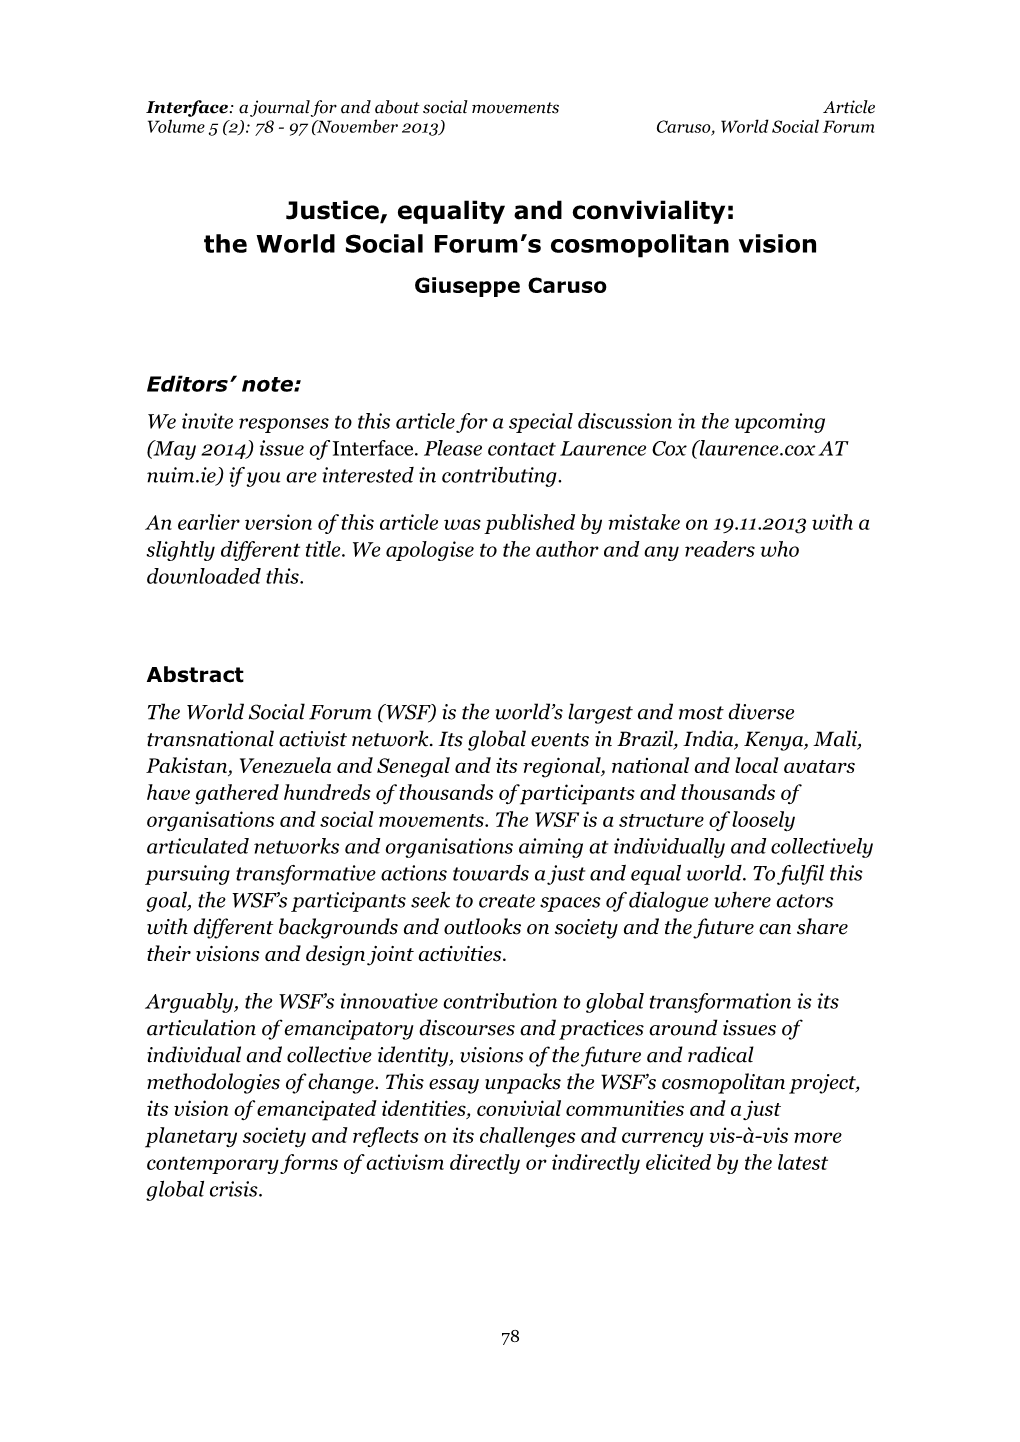 Justice, Equality and Conviviality: the World Social Forum's Cosmopolitan